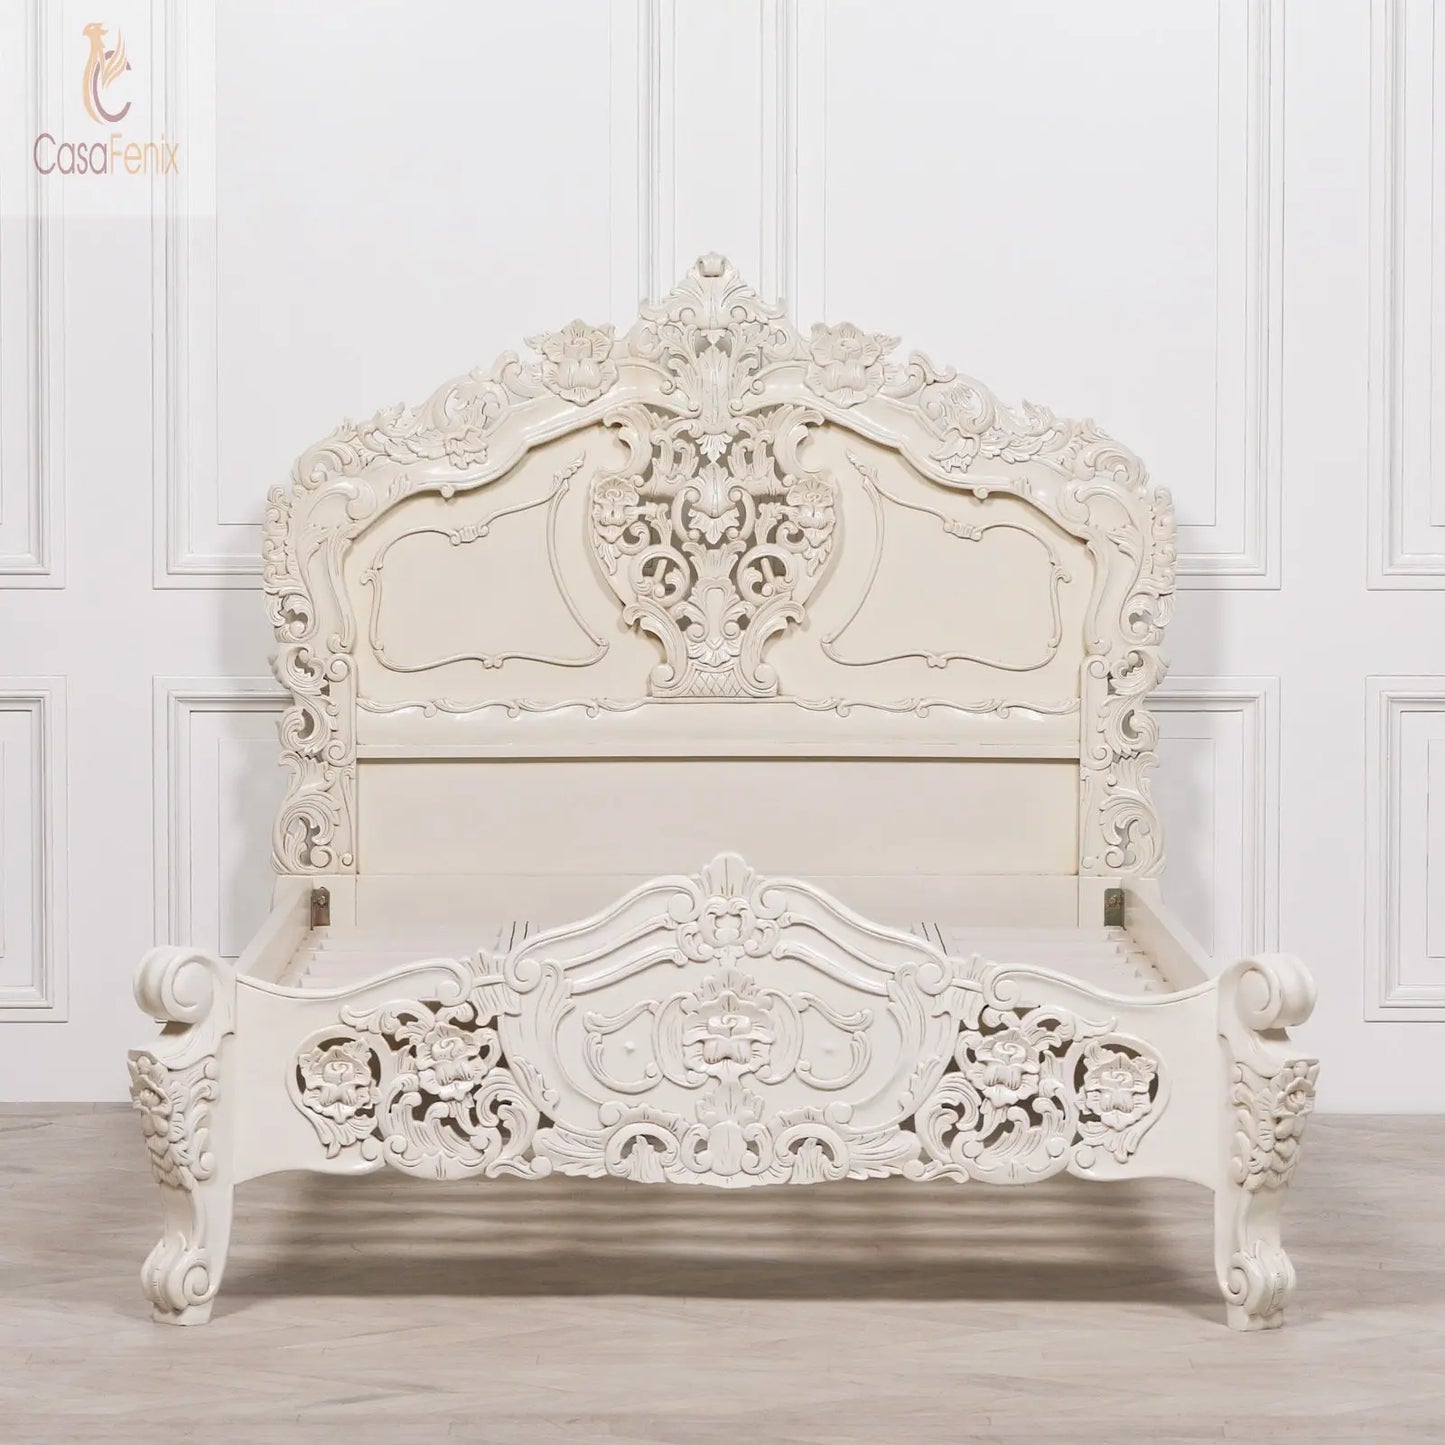 Rococo 4ft6 Double Size Carved Bed Off White Paint Finish - CasaFenix